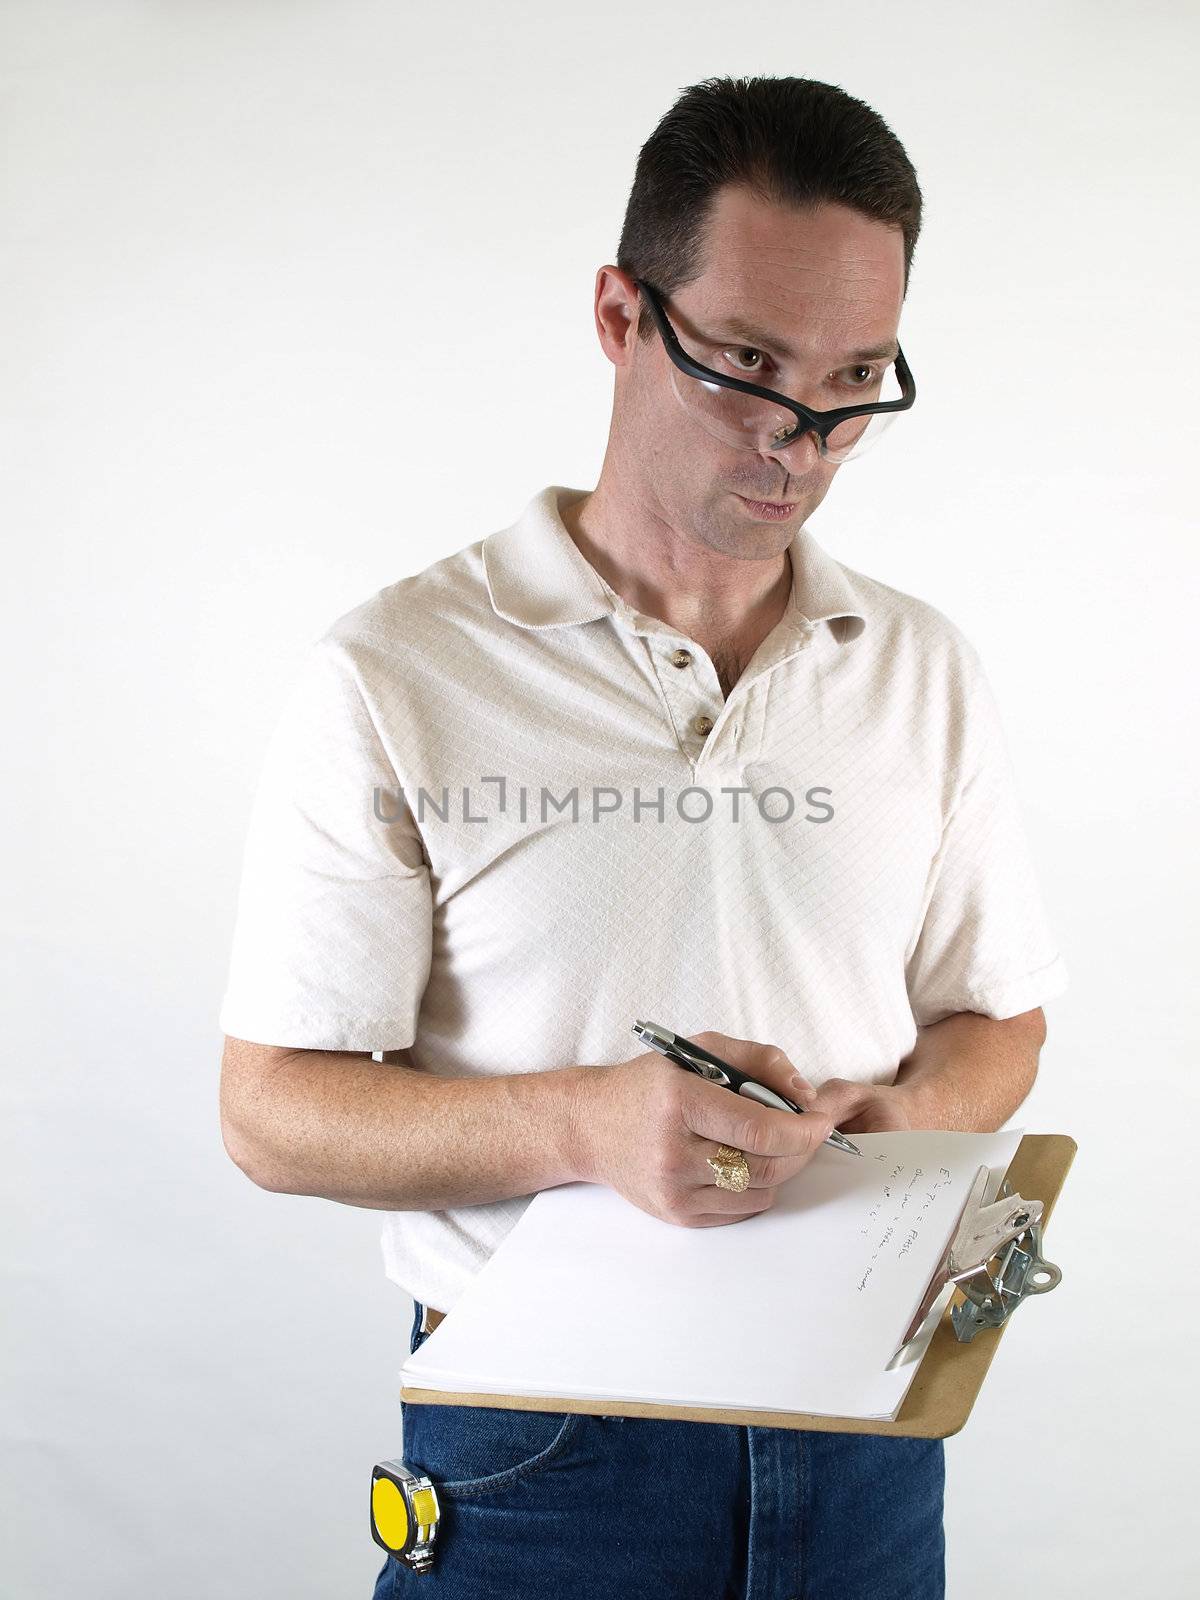 A male wearing safety glasses gives a look of doubt as he takes notes on his clipboard.